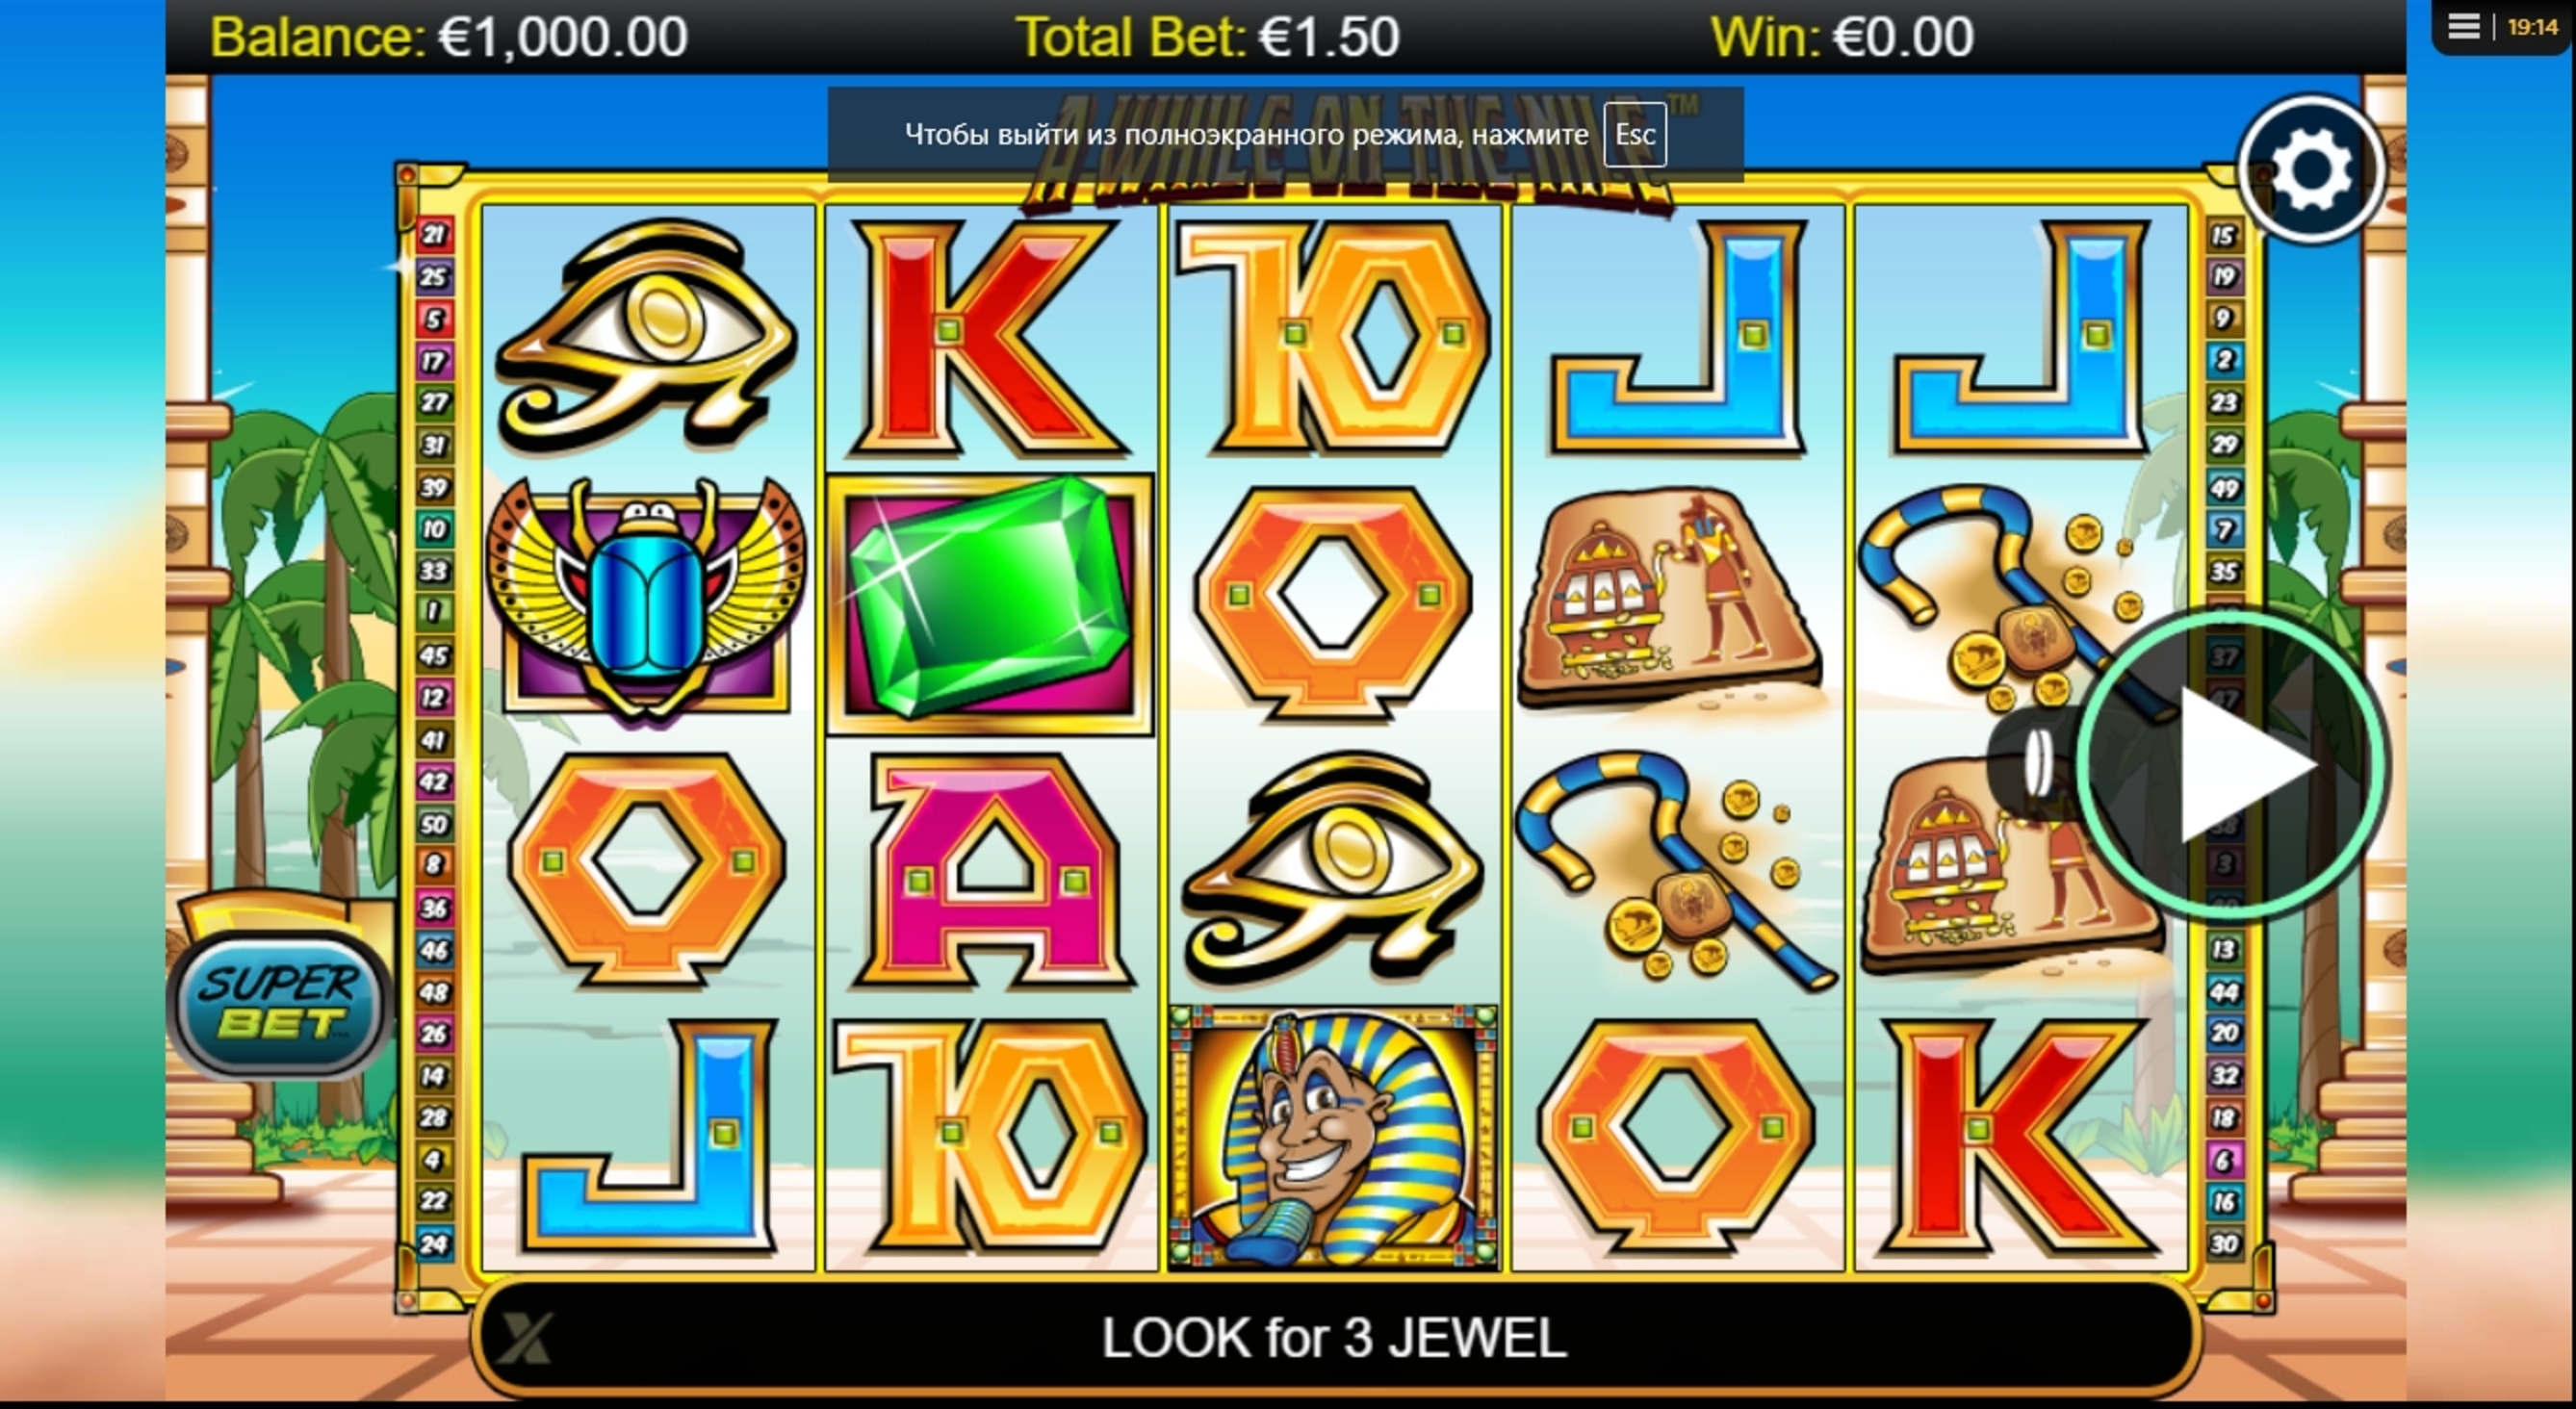 Play Gods of the Nile II Slot Machine Free with No Download